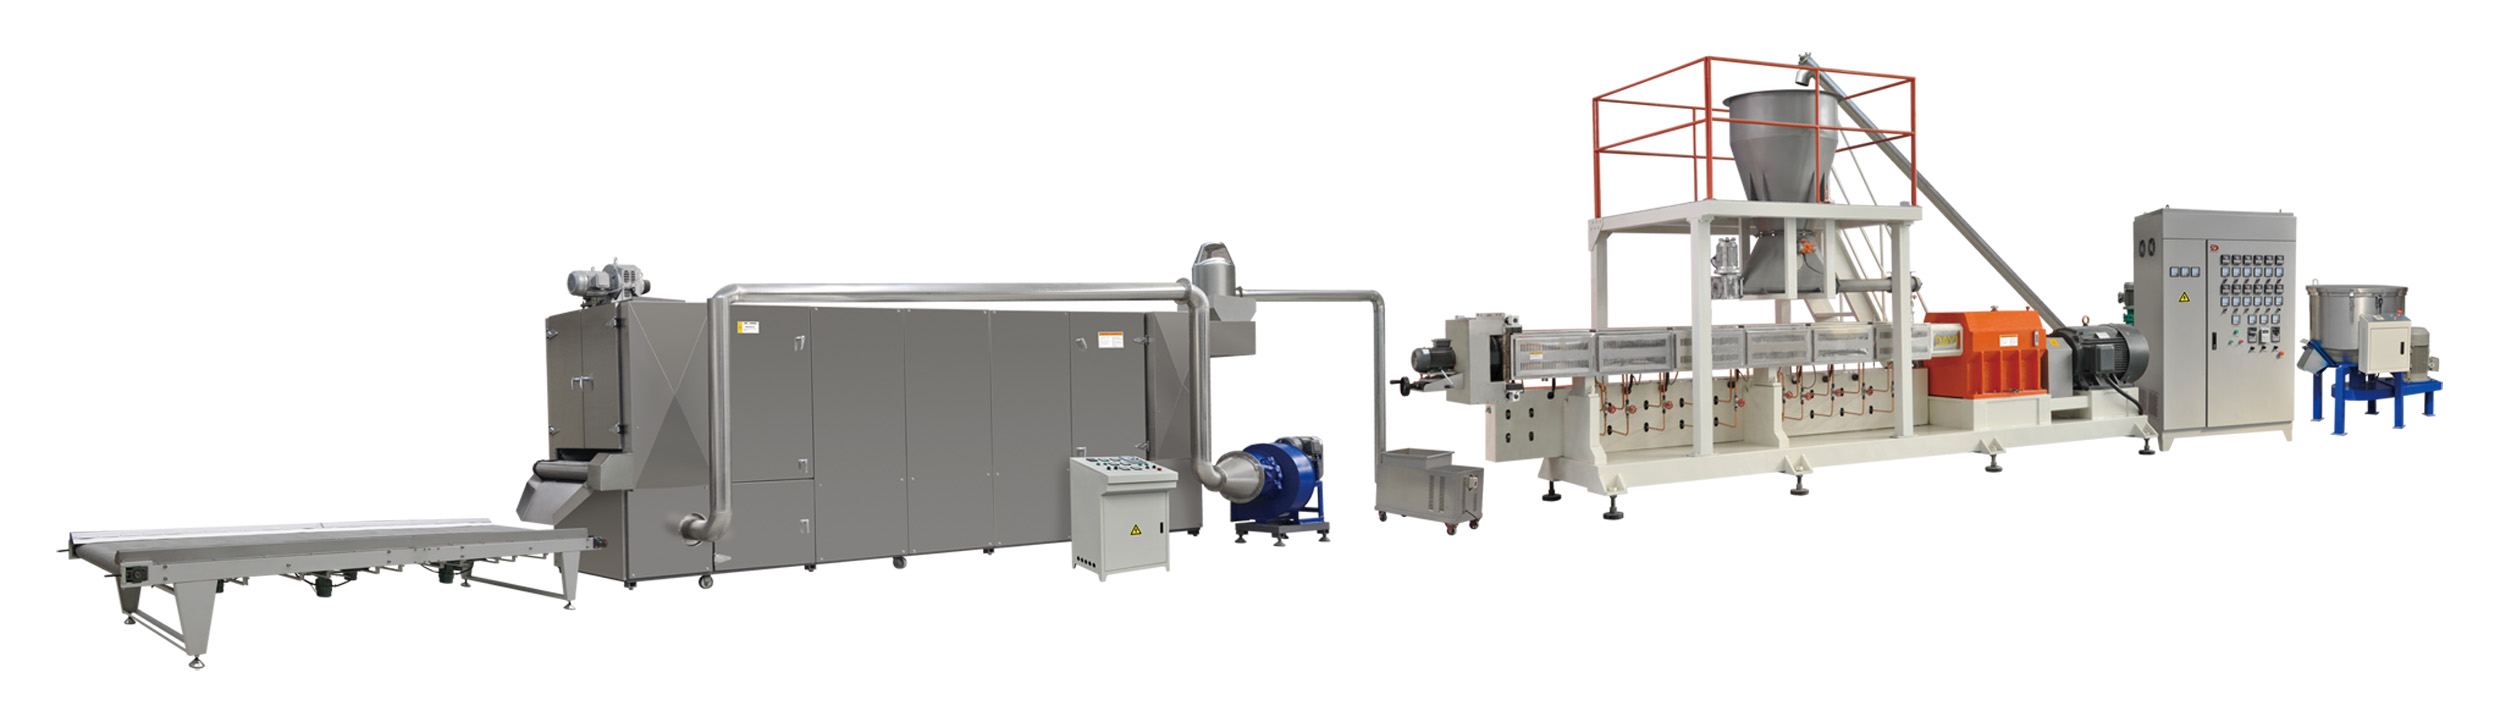 Food protein production line.jpg